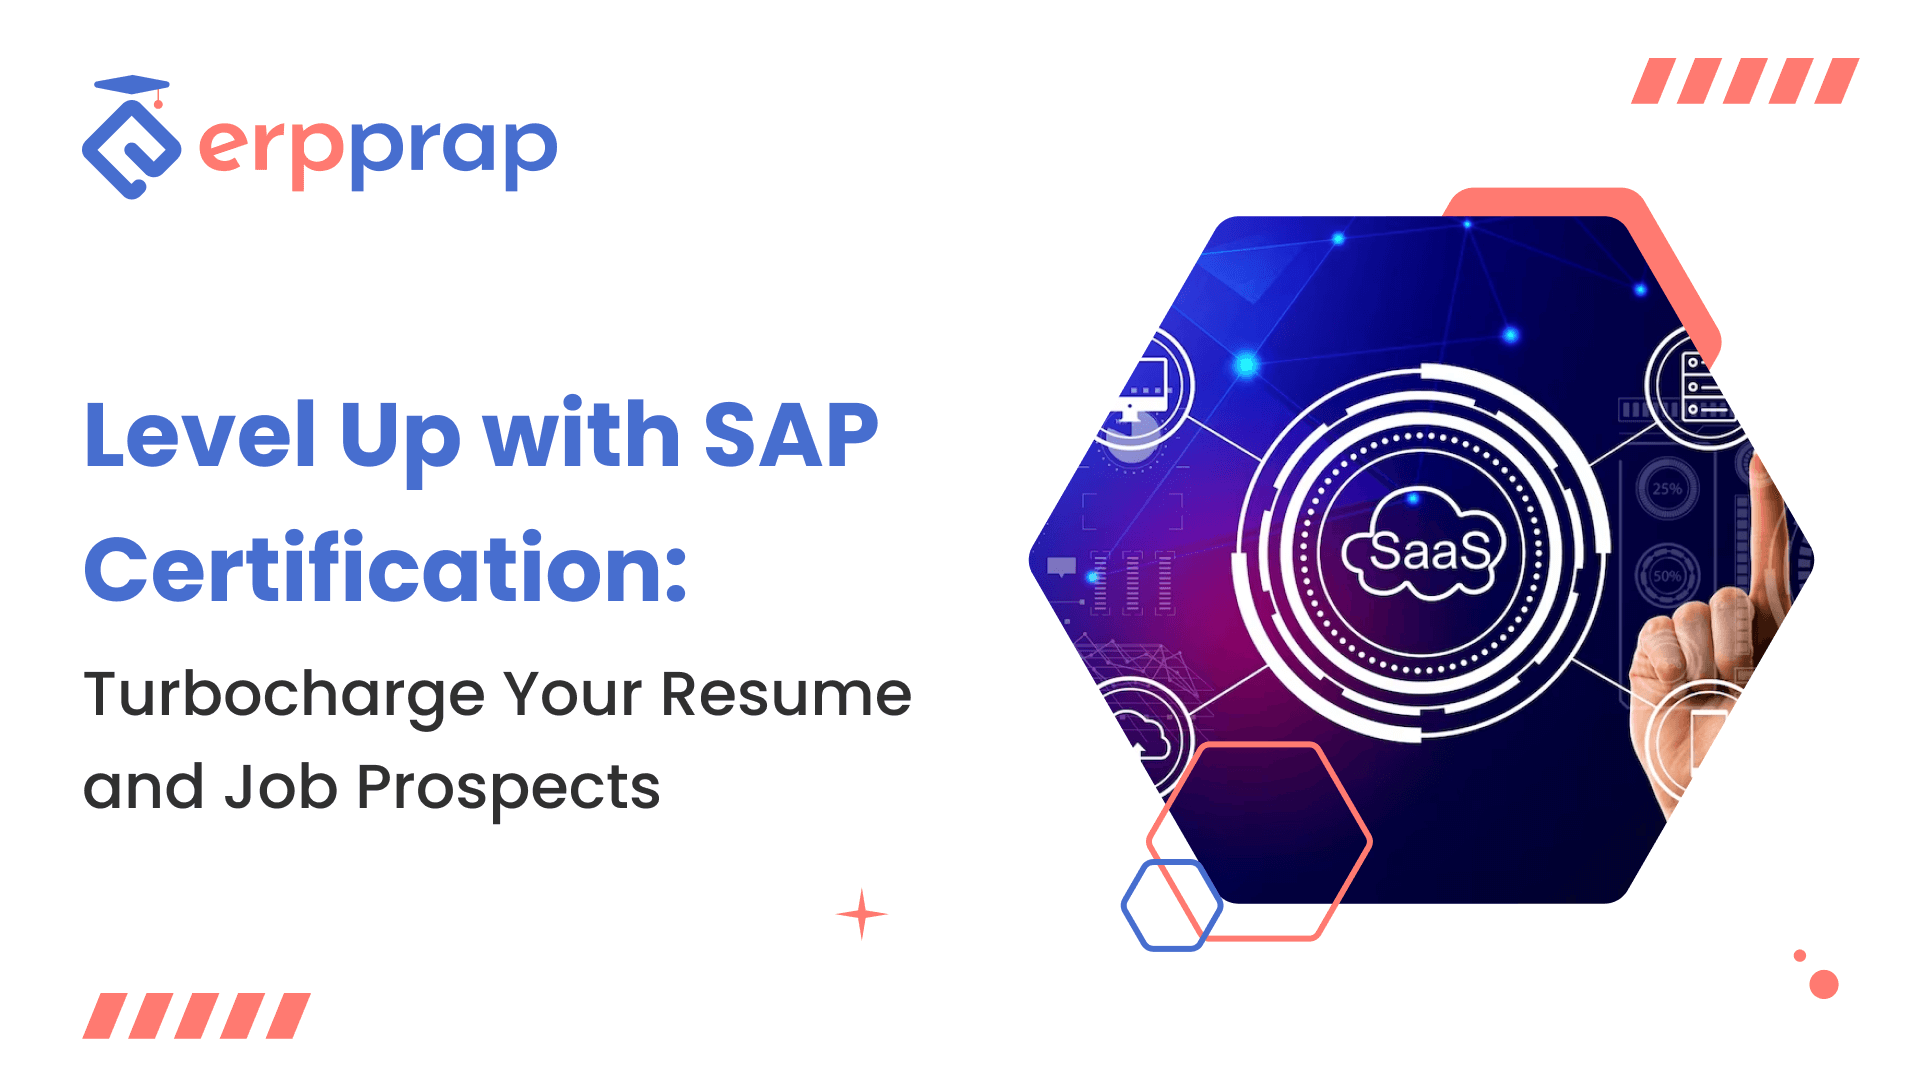 Level Up with SAP Certification: Turbocharge Your Resume and Job Prospects